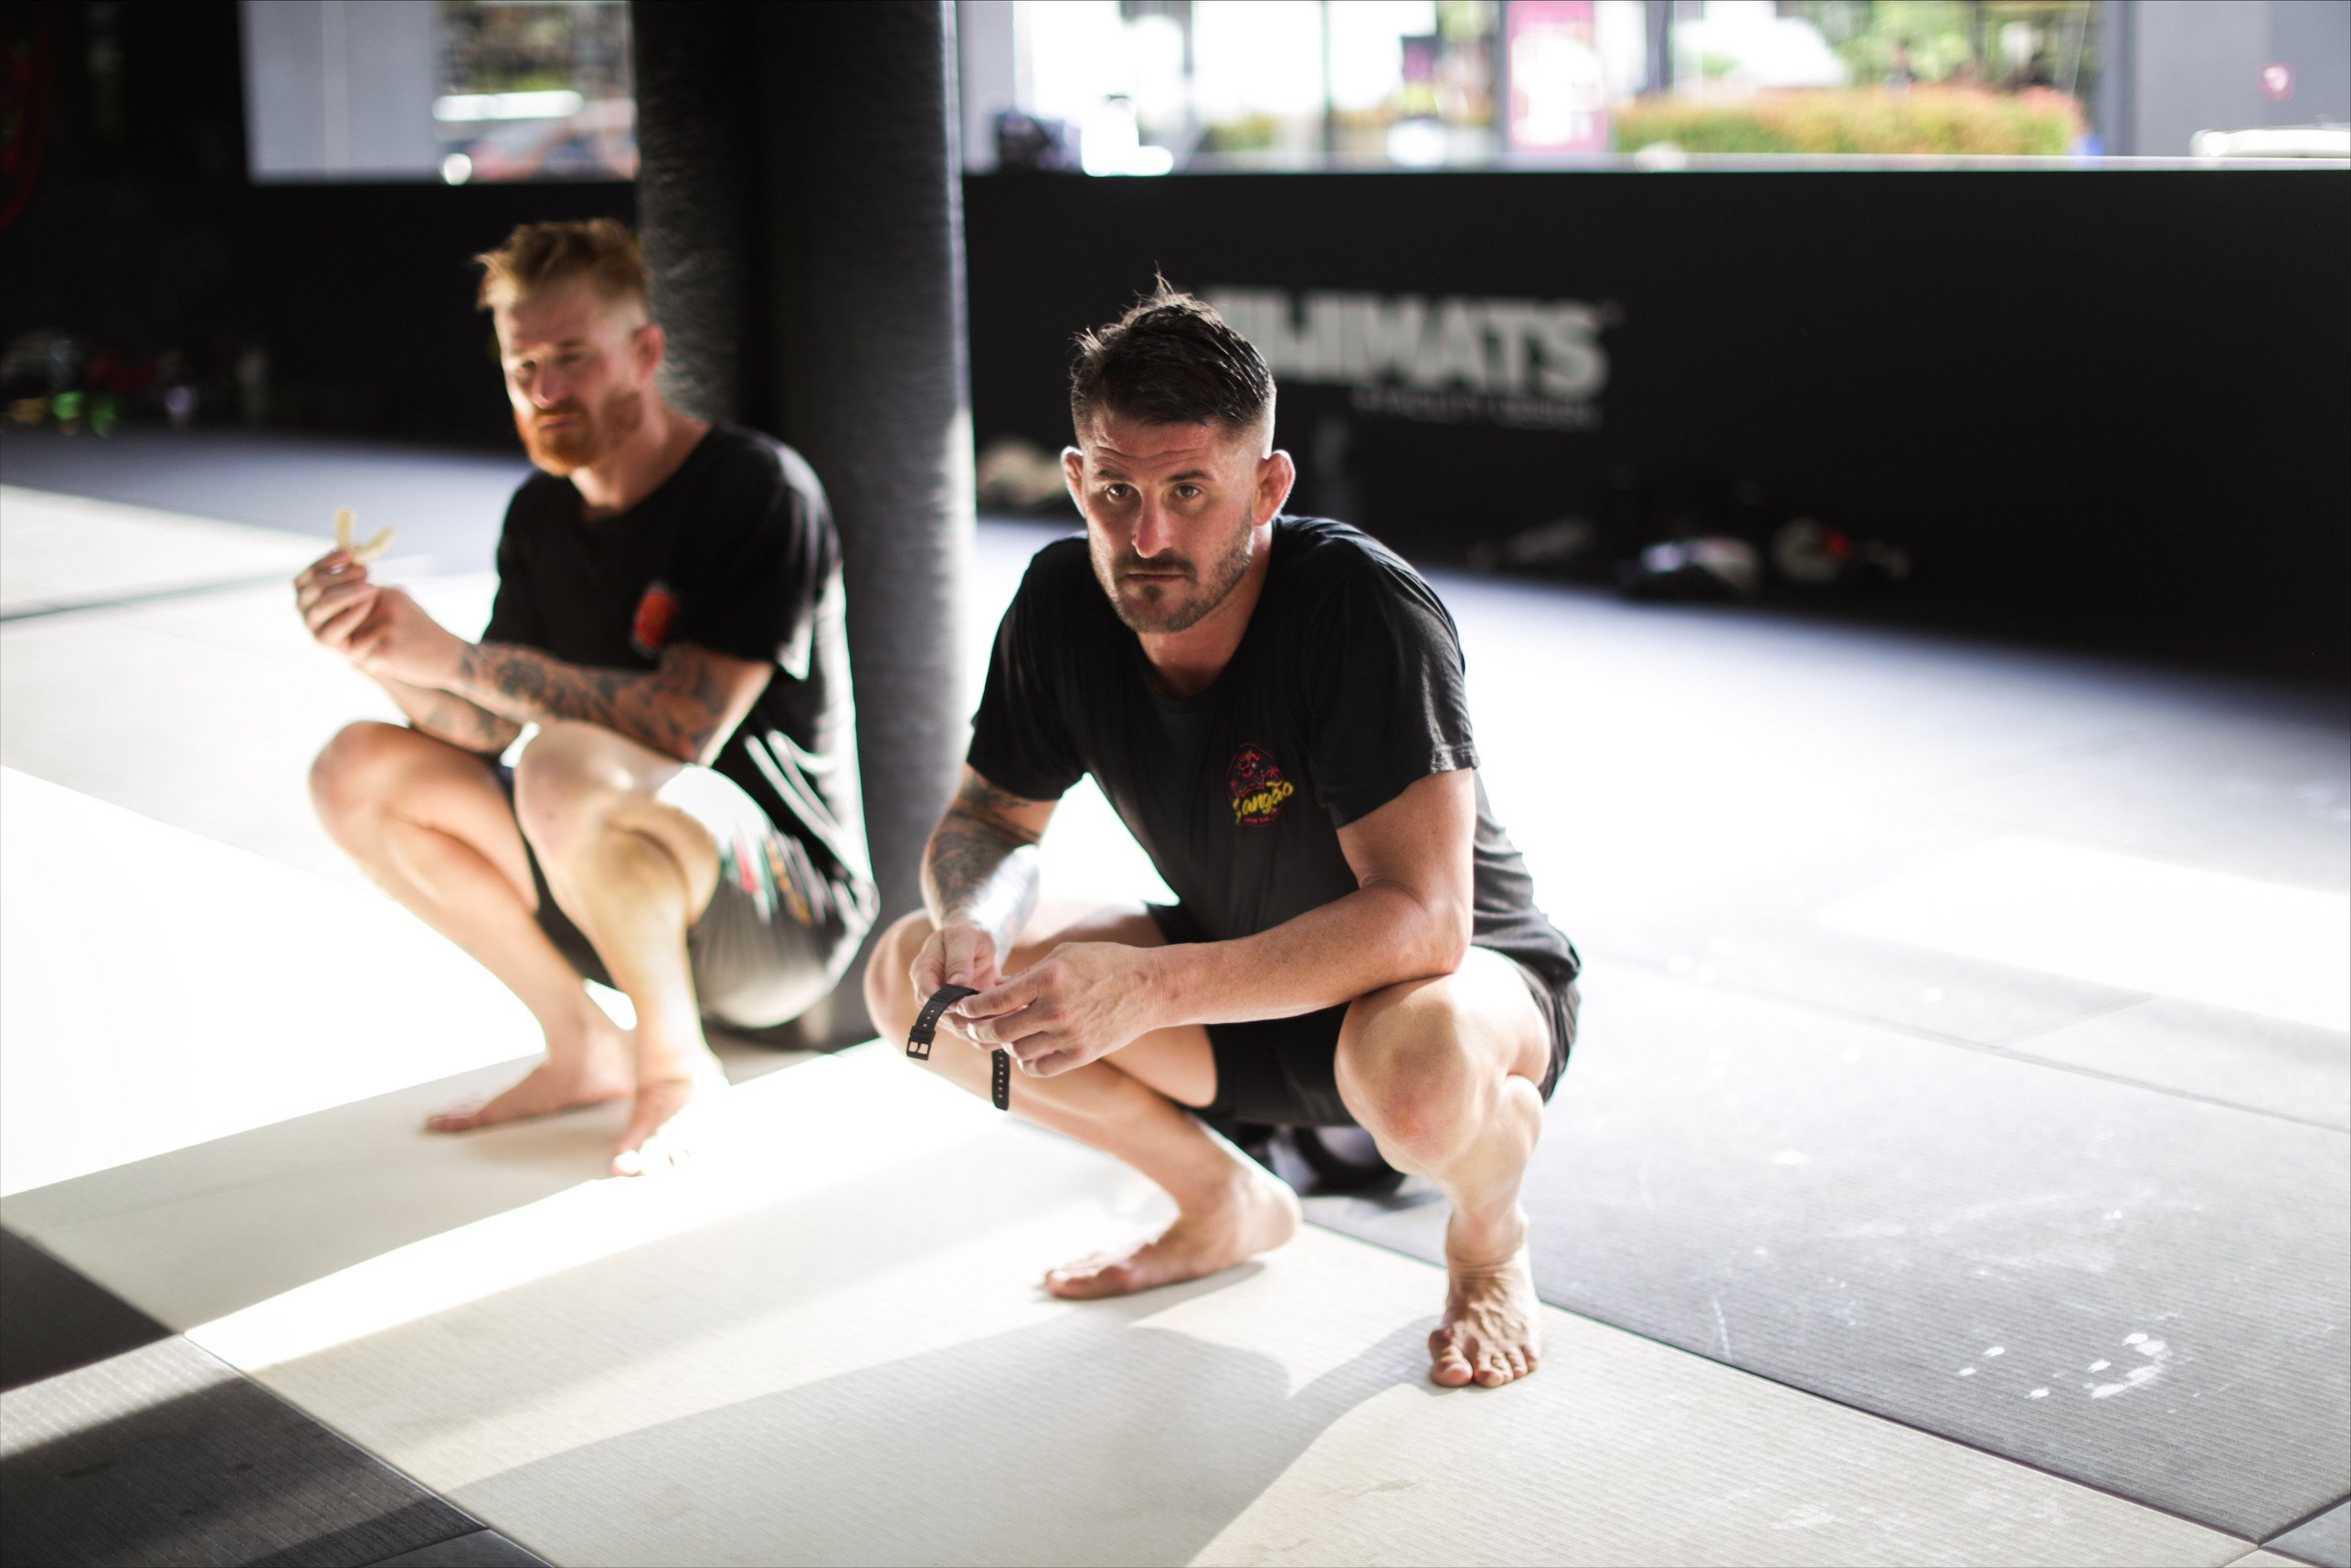 Mixed martial arts has not only survived the pandemic, it has thrived. Just ask Frank (left) and George Hickman, who set up Bangtao Muay Thai MMA in Phuket, Thailand. Photo: Bangtao Muay Thai MMA